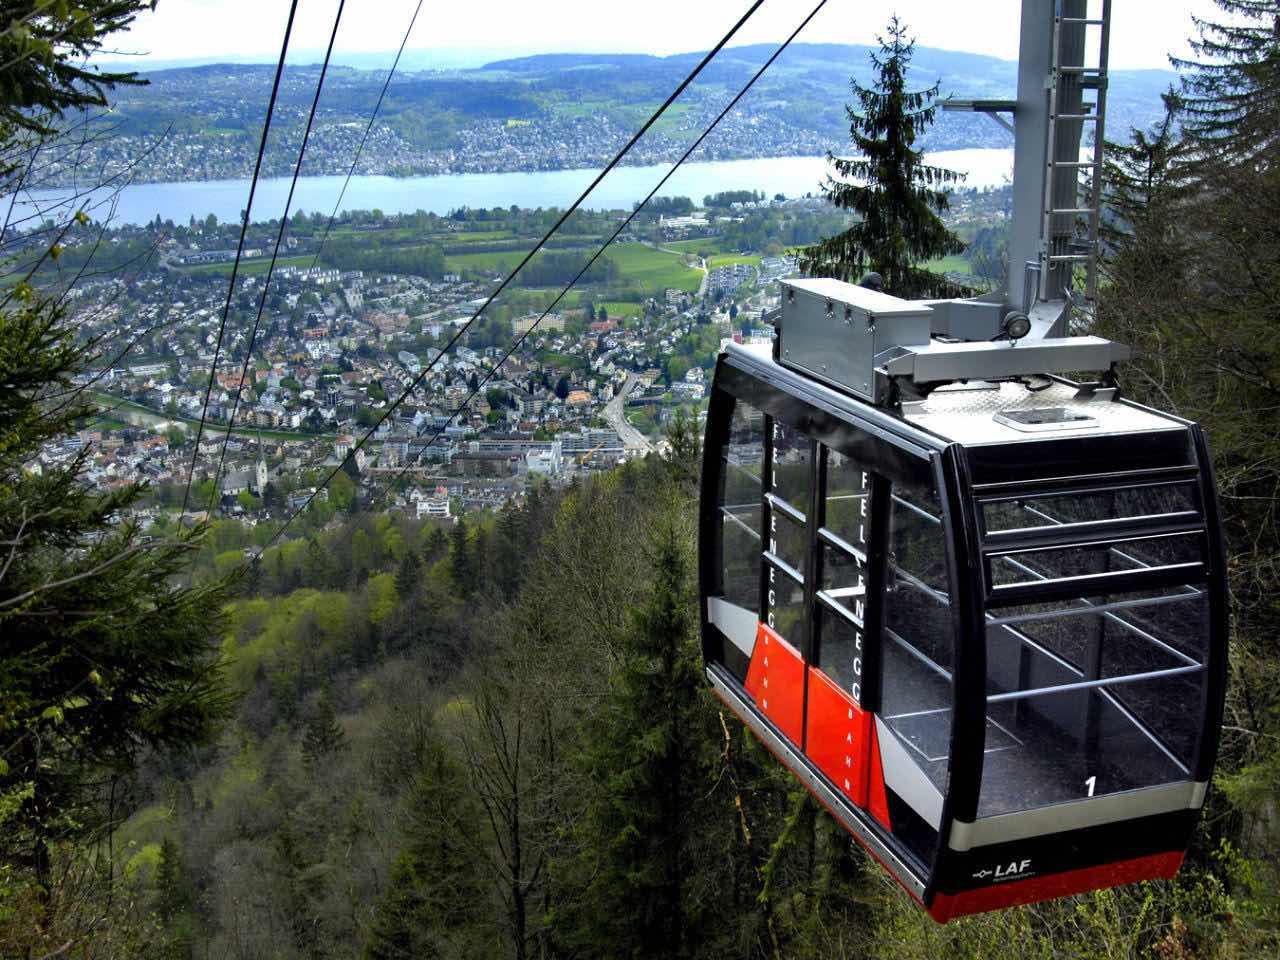 You can also ride an aerial cable car to Felsenegg!